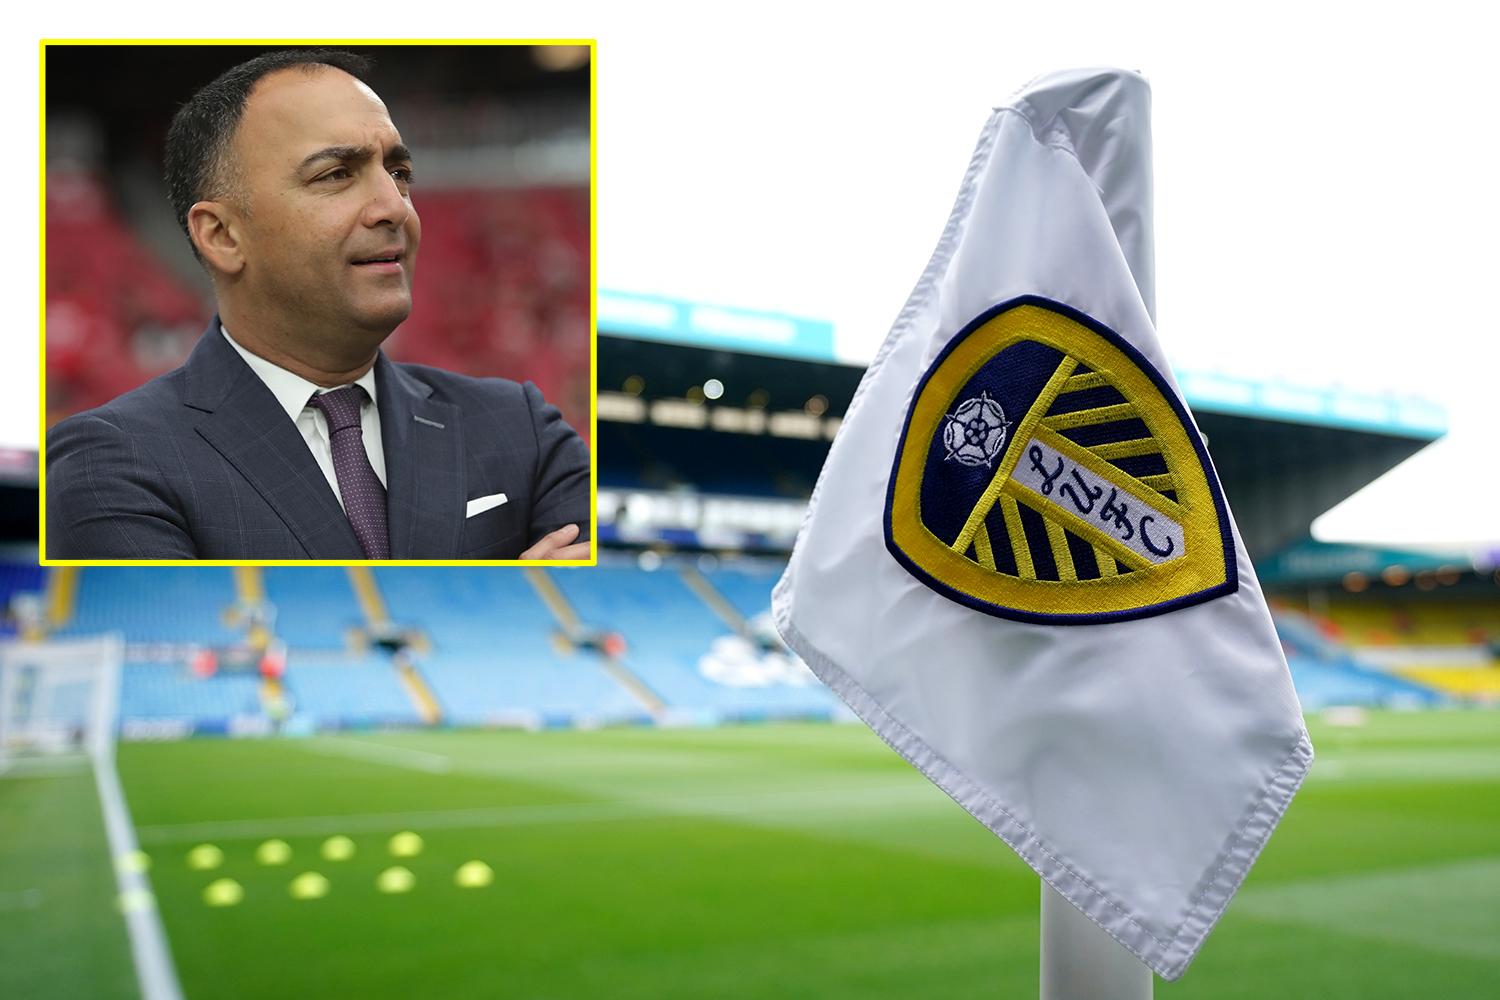 Leeds confirm 49ers Enterprises takeover from Andrea Radrizzani and target 'quick return to the Premier League'